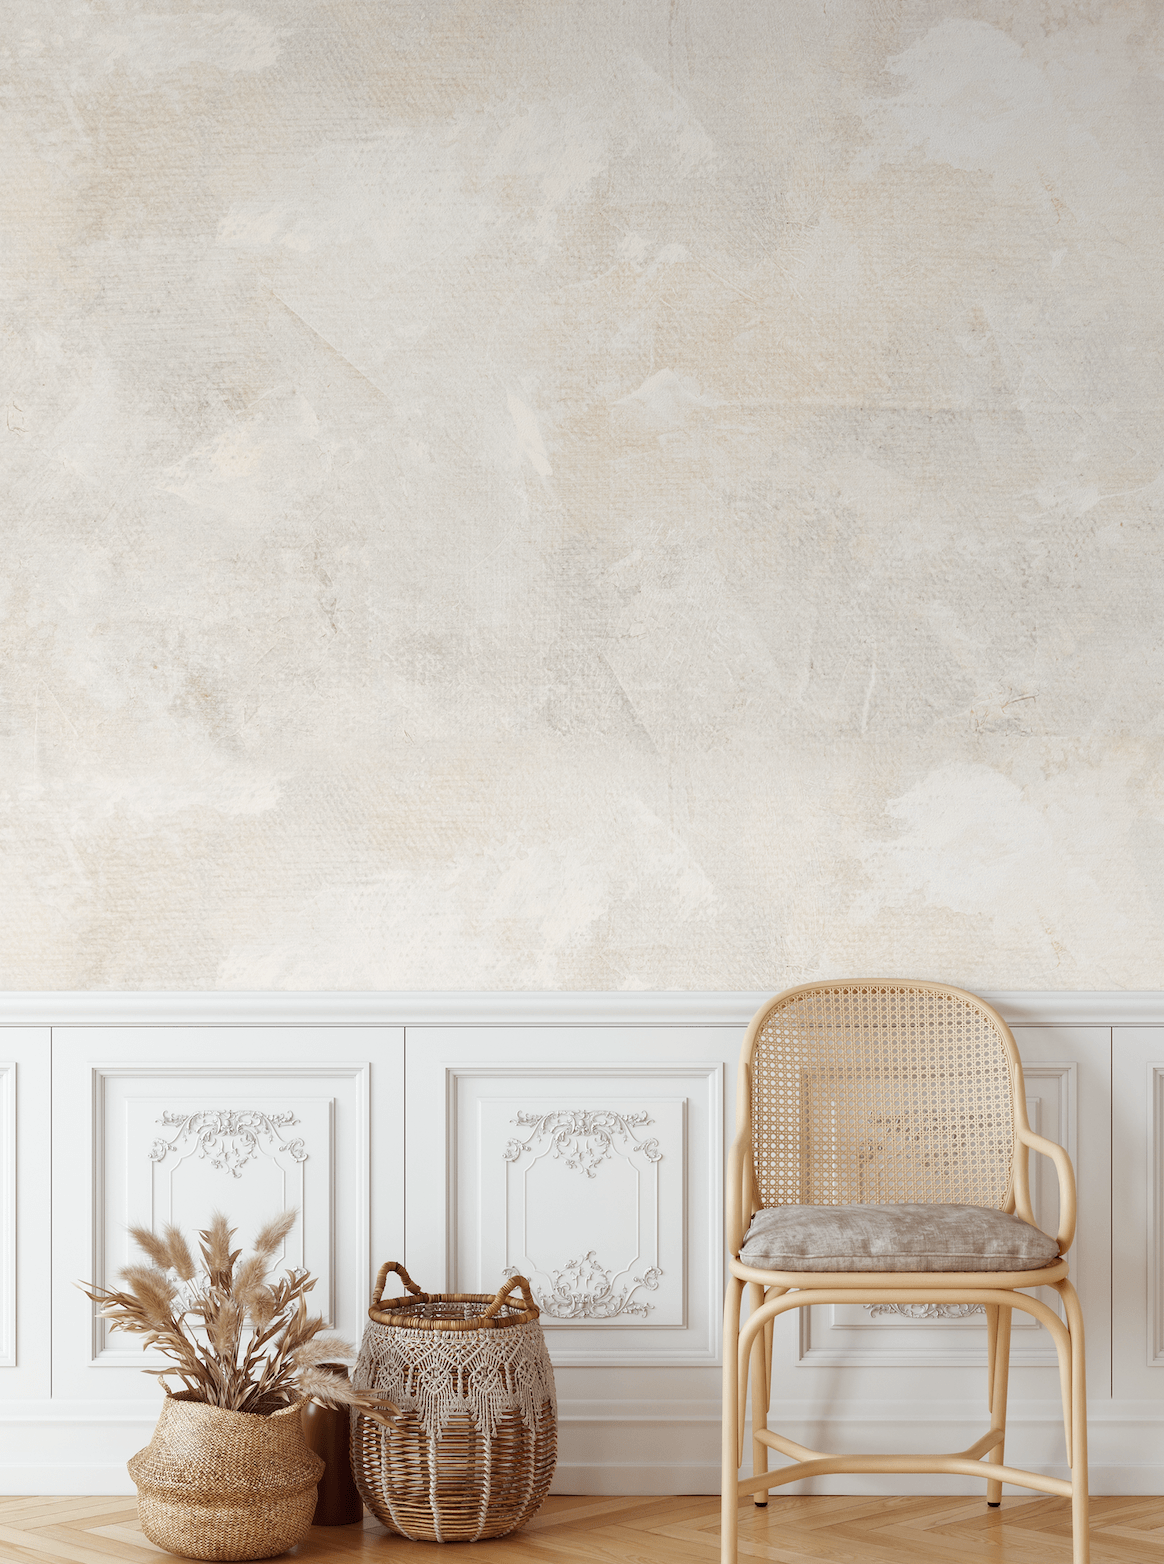 textured wallpaper plaster clay, limewash wallpaper, peel and stick removable wall paper